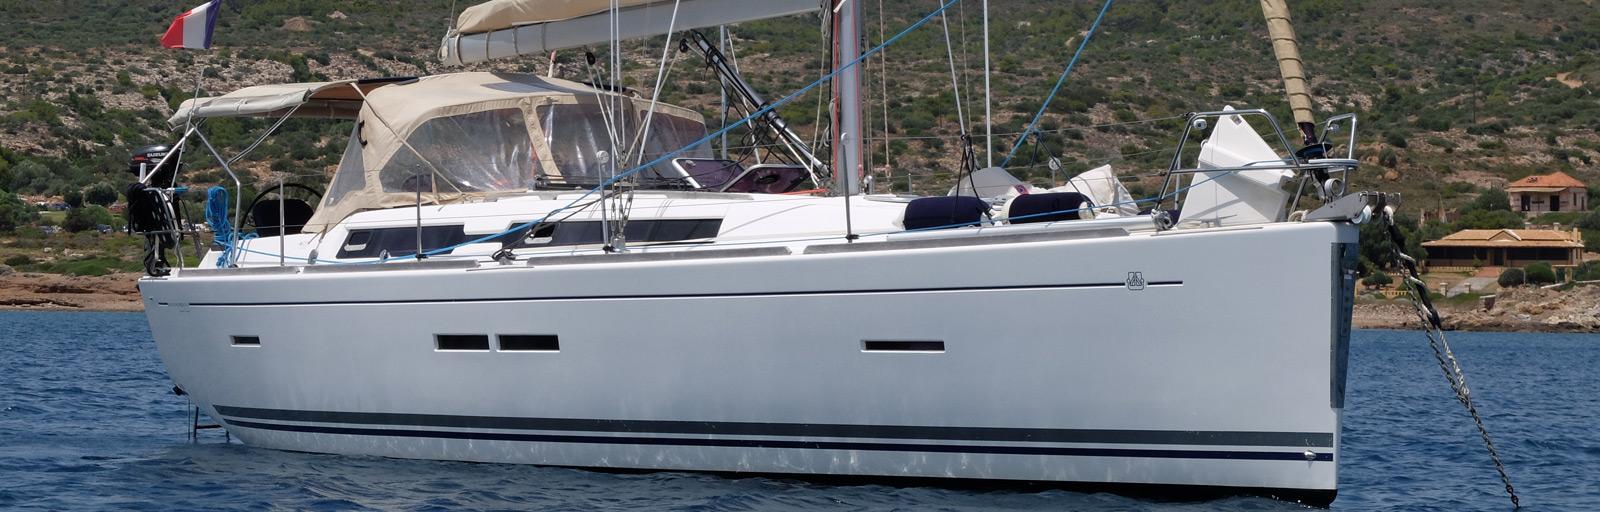 AYC Yachtbroker - Dufour 405 Grand Large